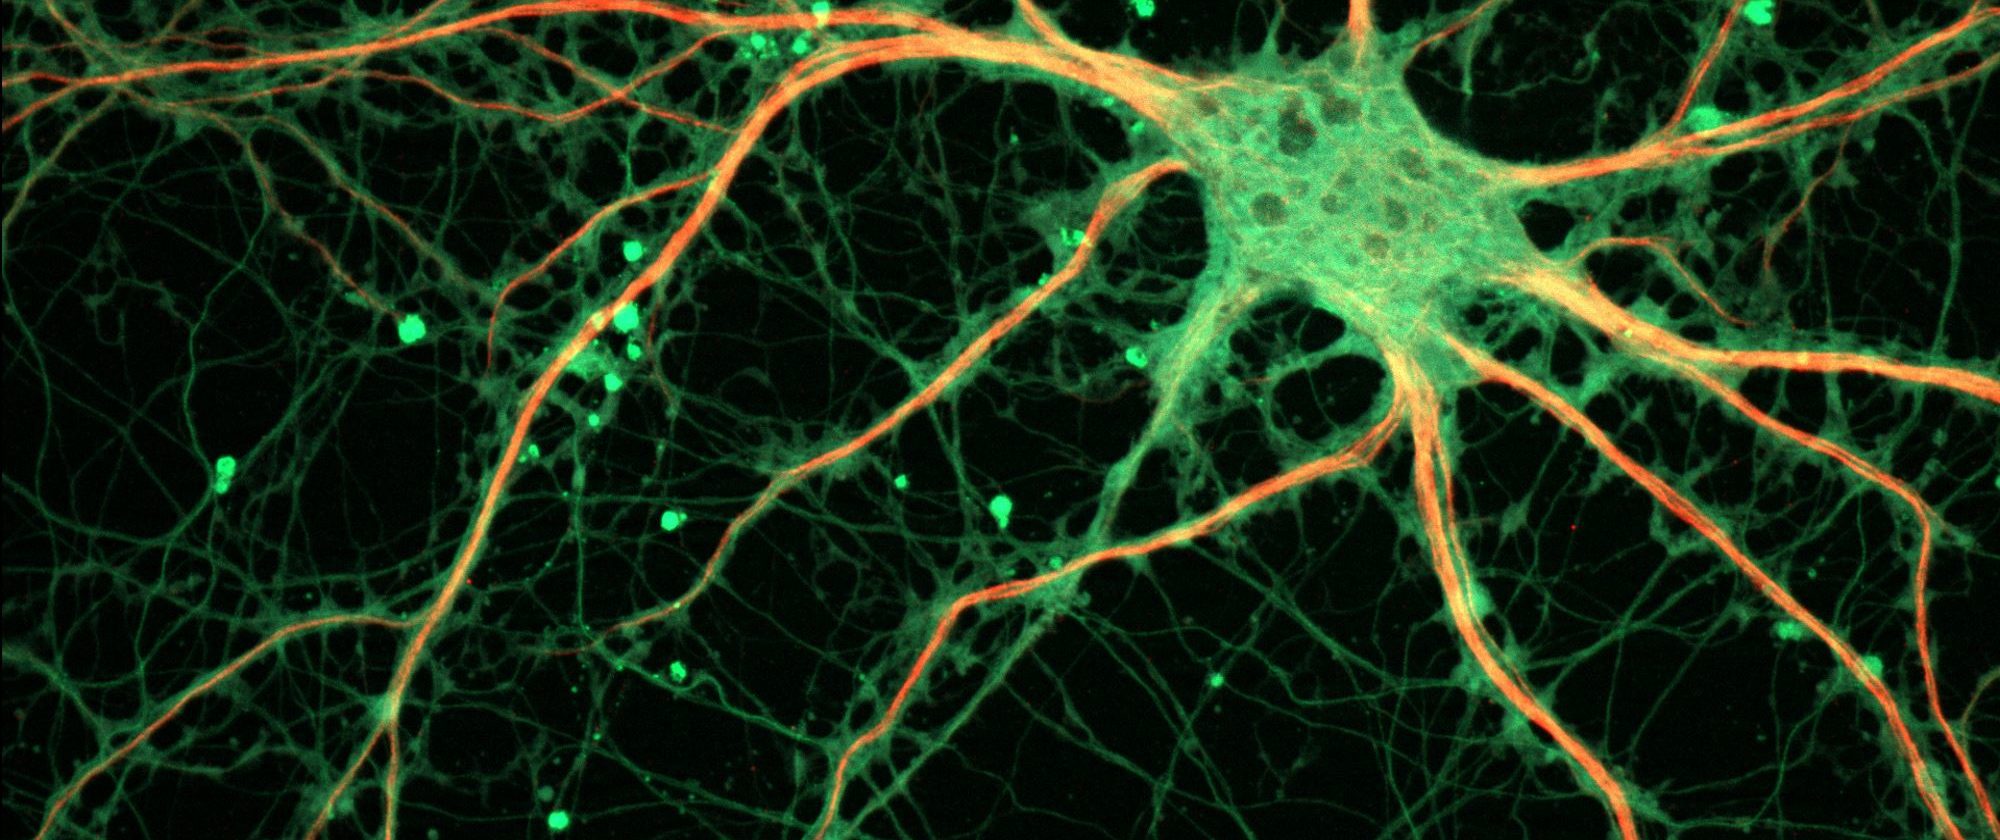 Ion channels play an essential role in the synapses. Without them, the nervous system would not be able to send or receive signals (Picture by ZEISS Microscopy at Wikipedia).